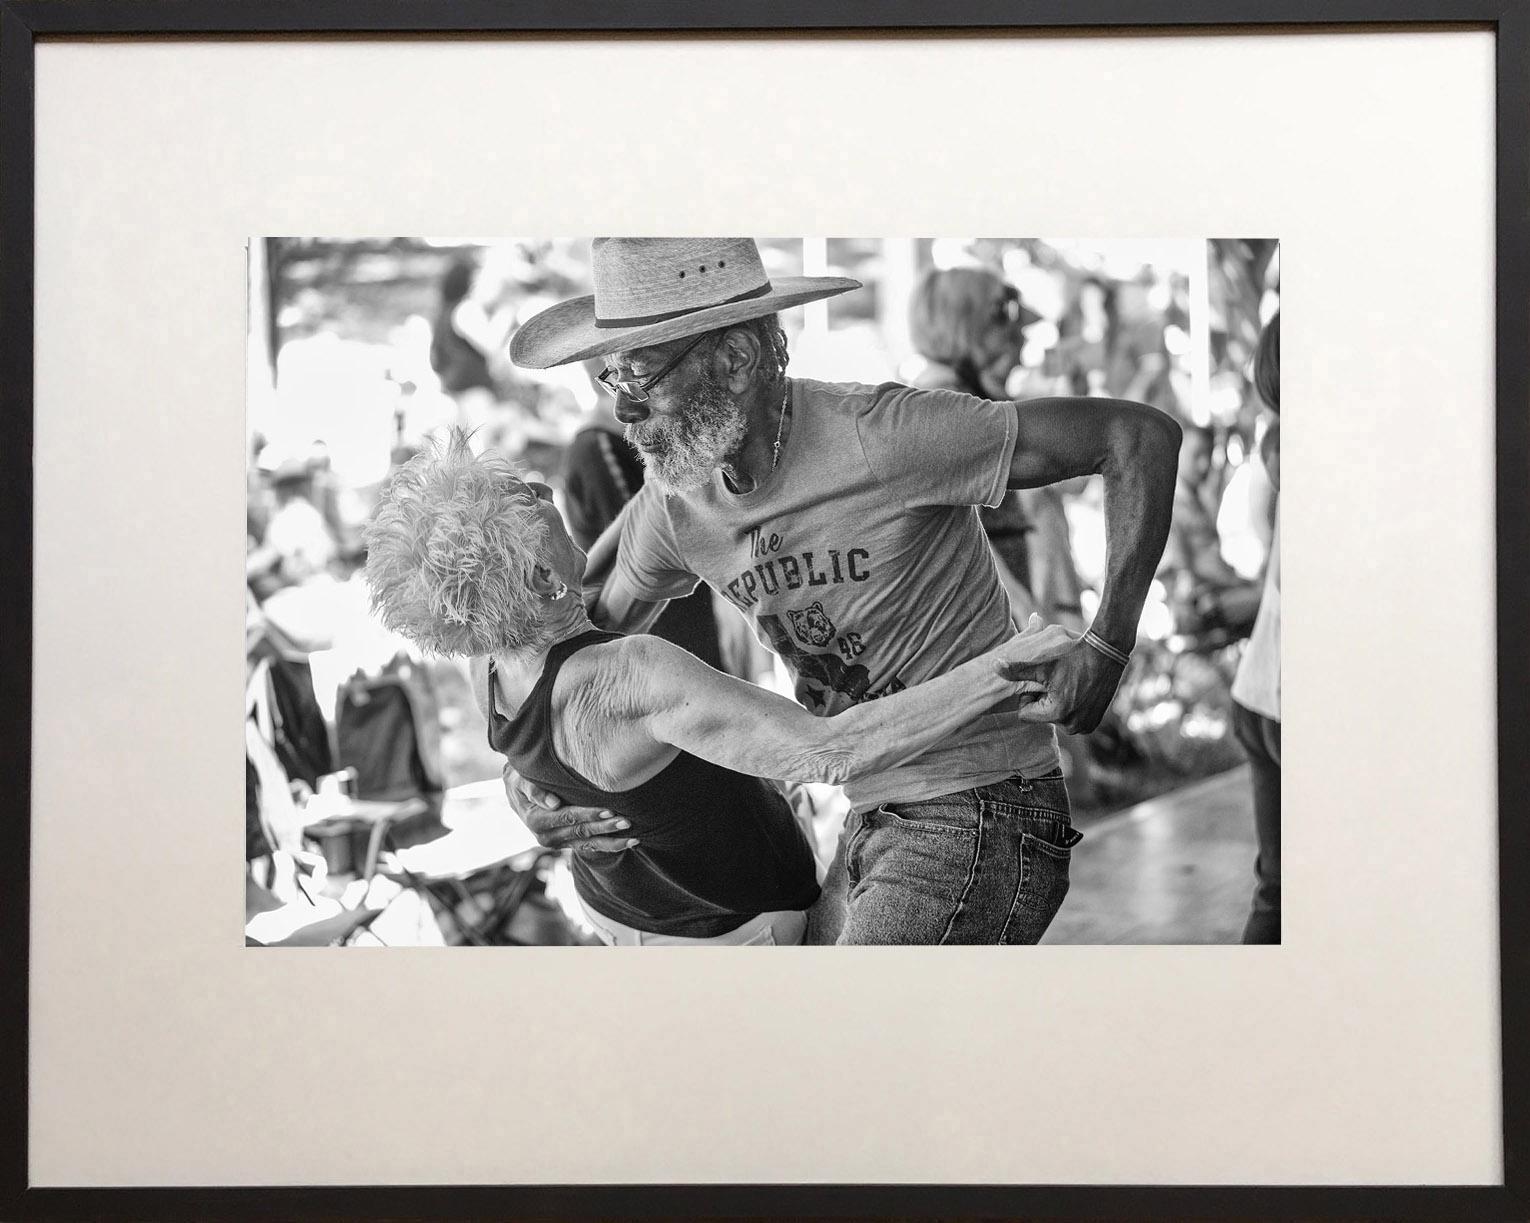 A moment of joy on the dancefloor at the Festival Acadiens et Creoles in 2019 in Lafayette, Louisiana.  A joyous connection!

Lafayette
Louisiana, USA
2019

James Sparshatt‘s black and white portraits are a search for a connection with a world of